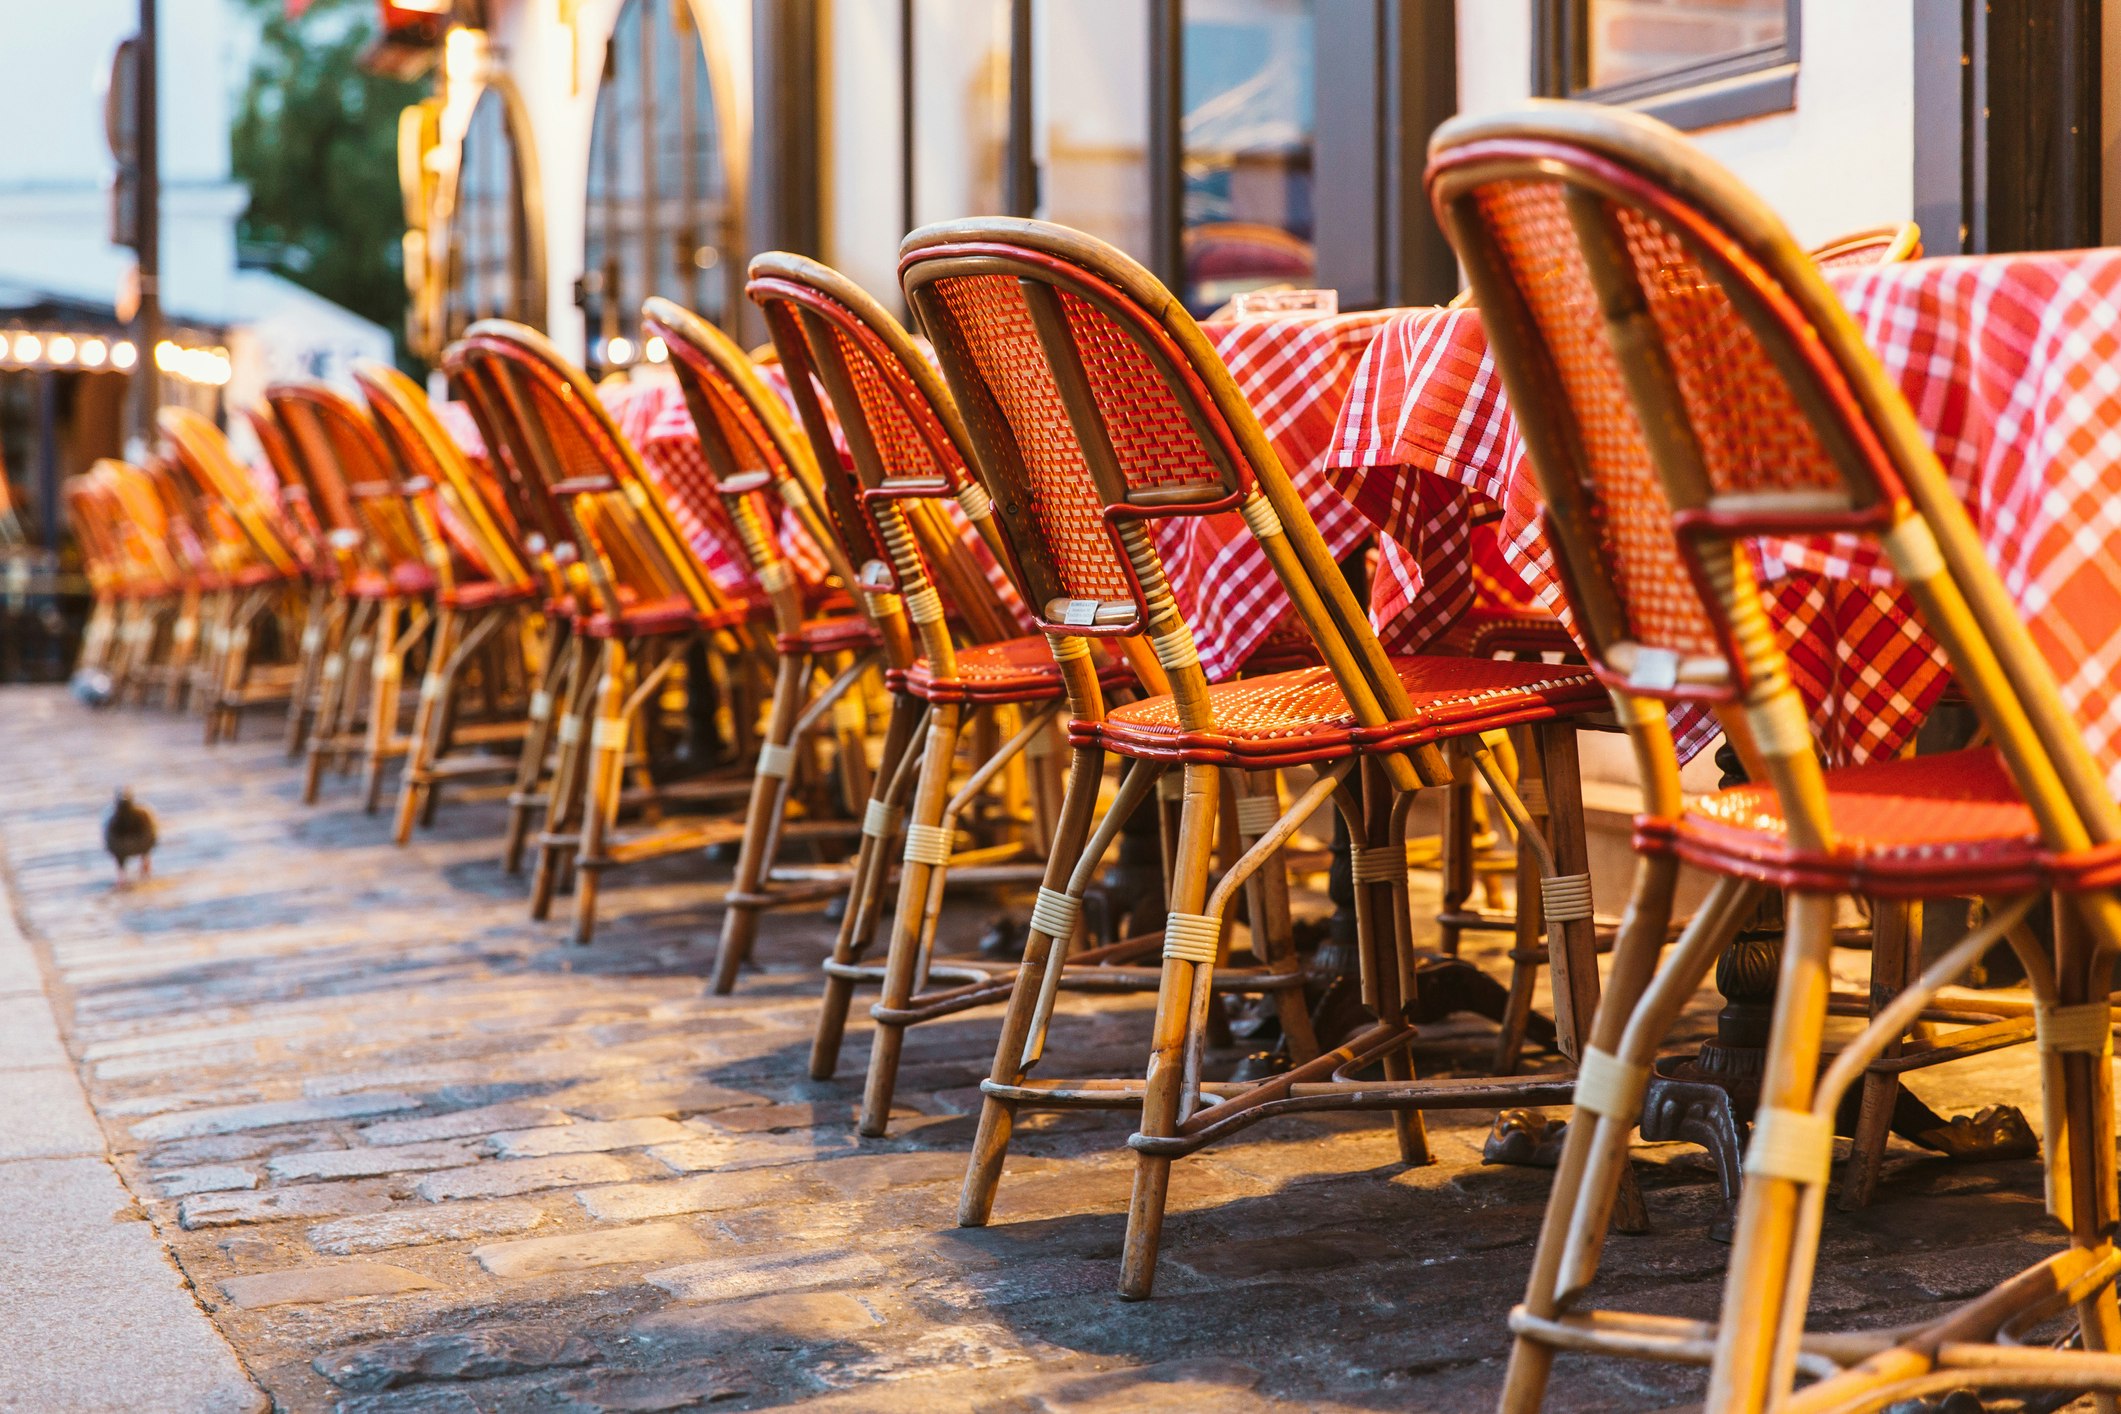 Chairs and table in a traditional Parisian sidewalk cafe